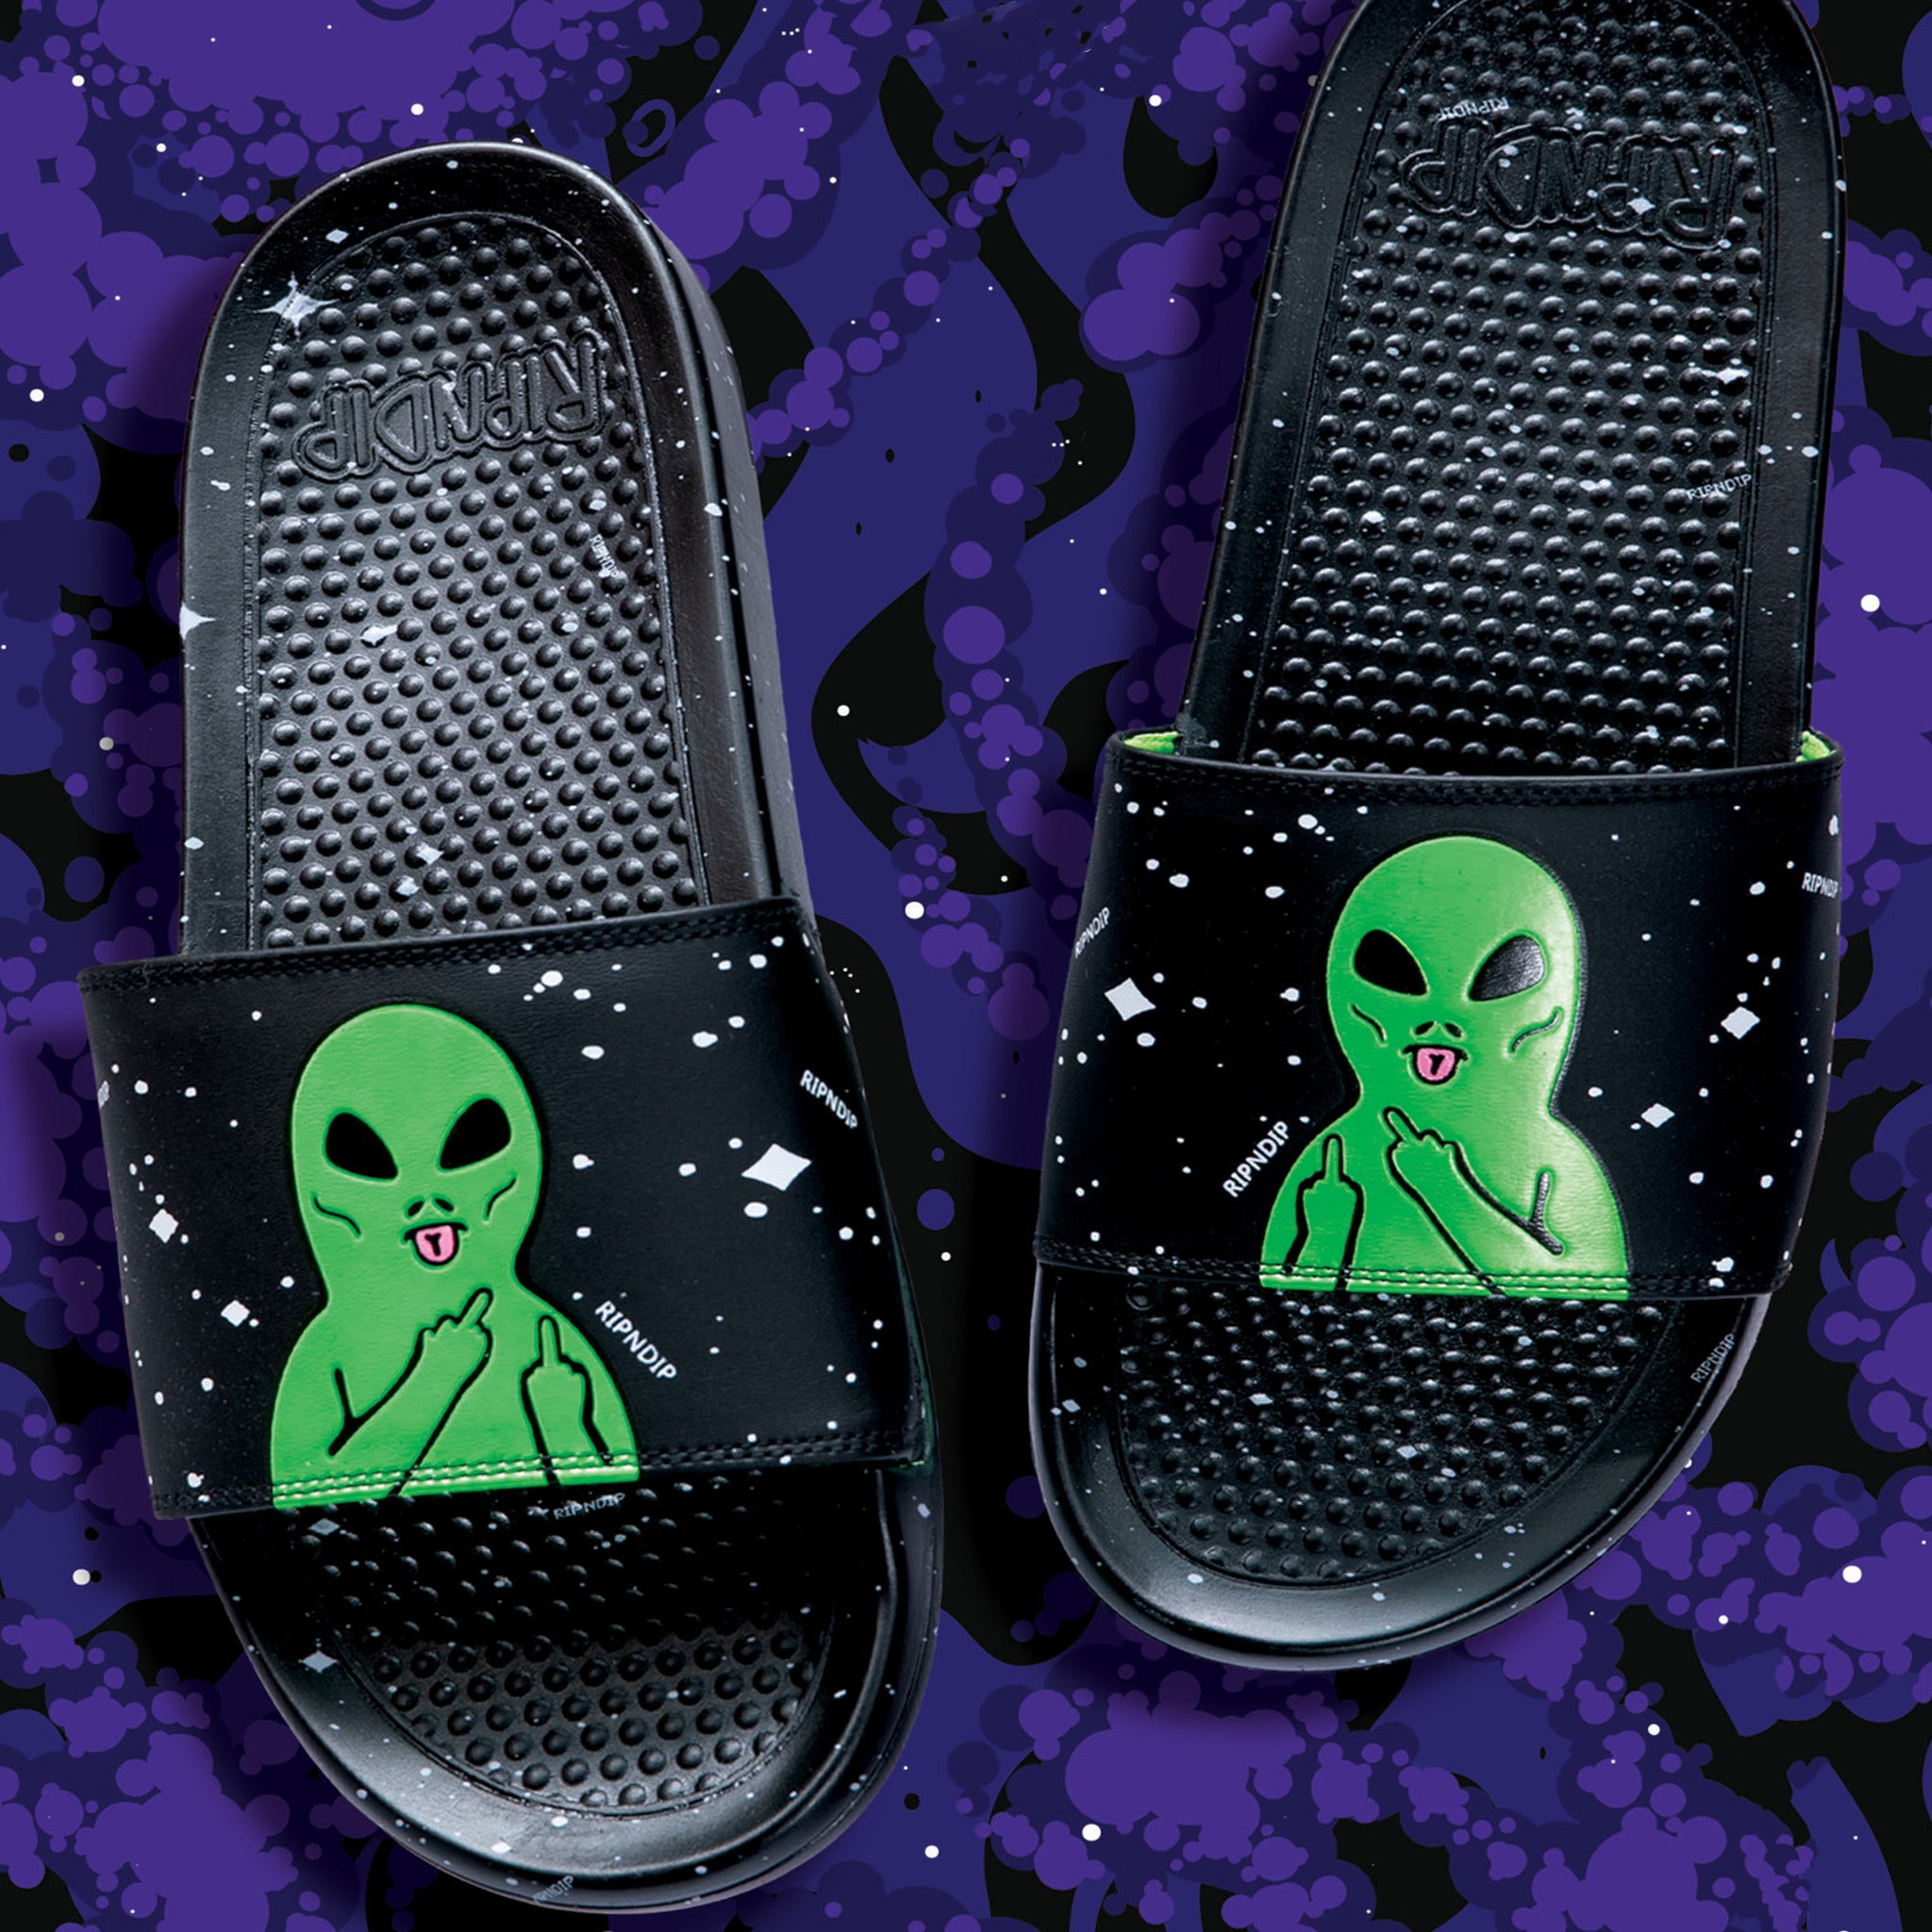 RipNDip We Out Here Slides (Black/Neon Green)